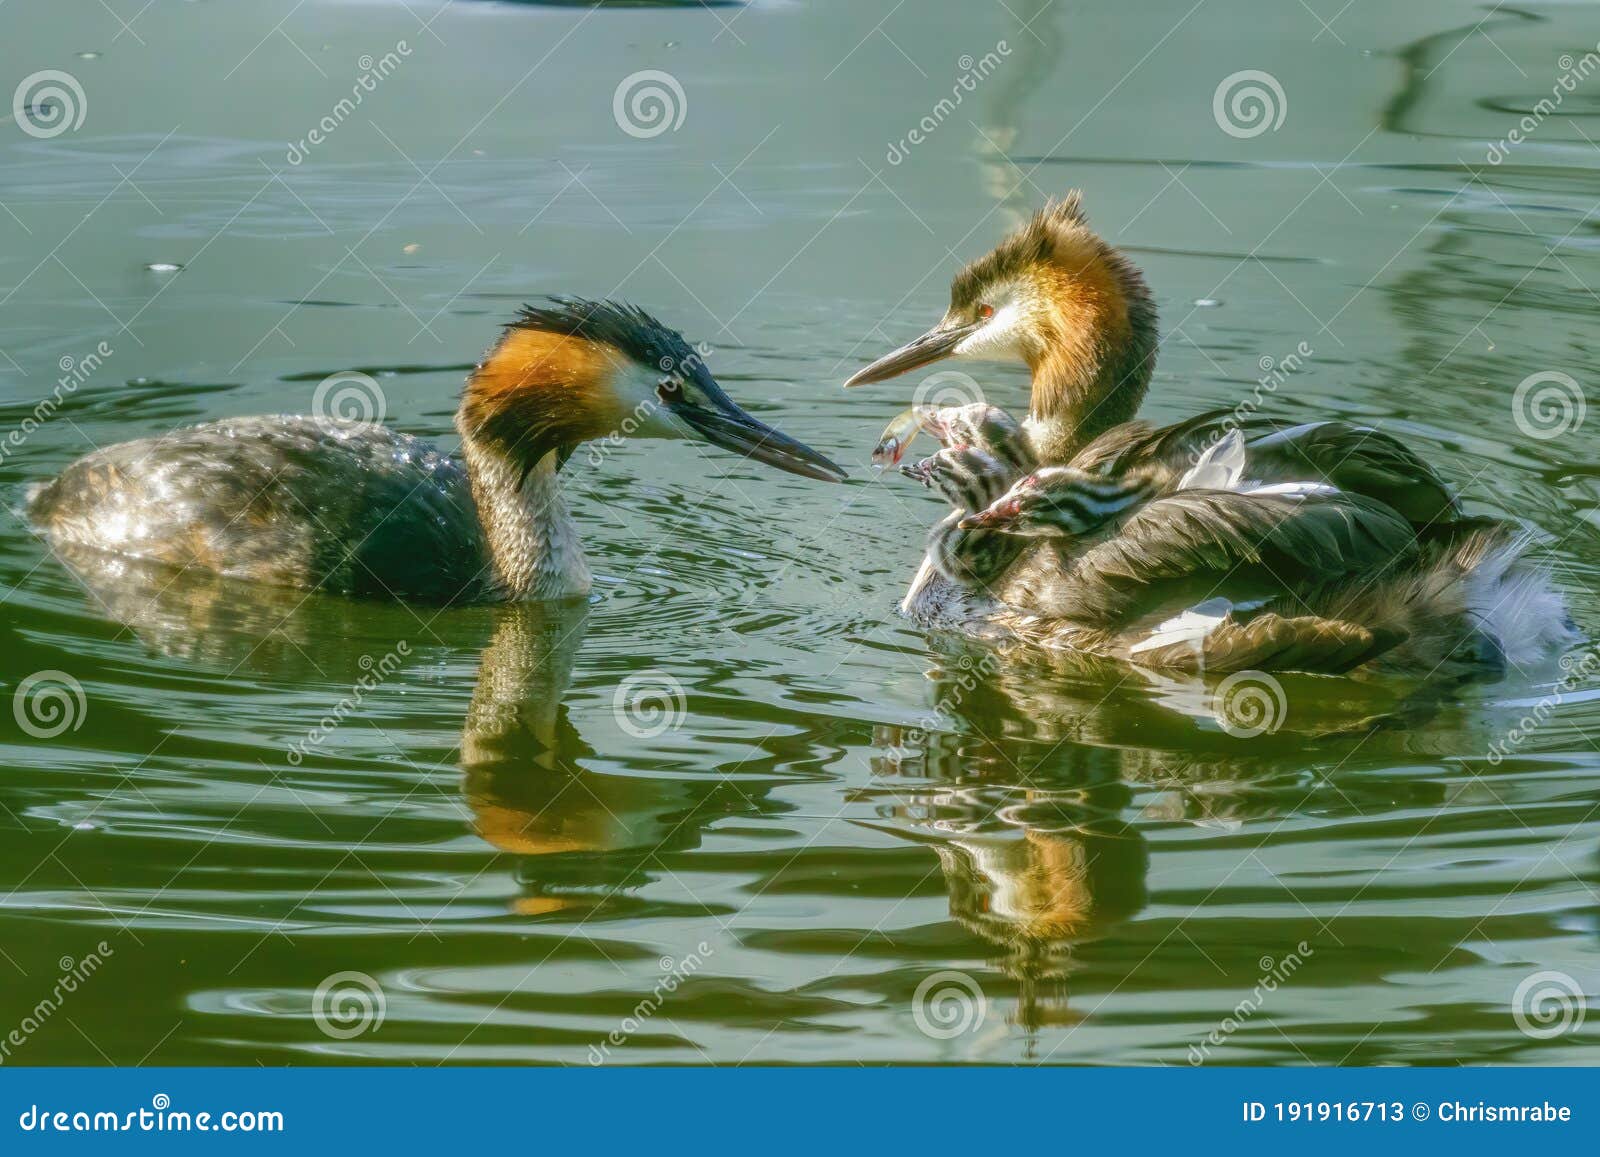 great crested grebe (podiceps cristatus) parent feeding a fish to one of it's chicks, taken in twickenham